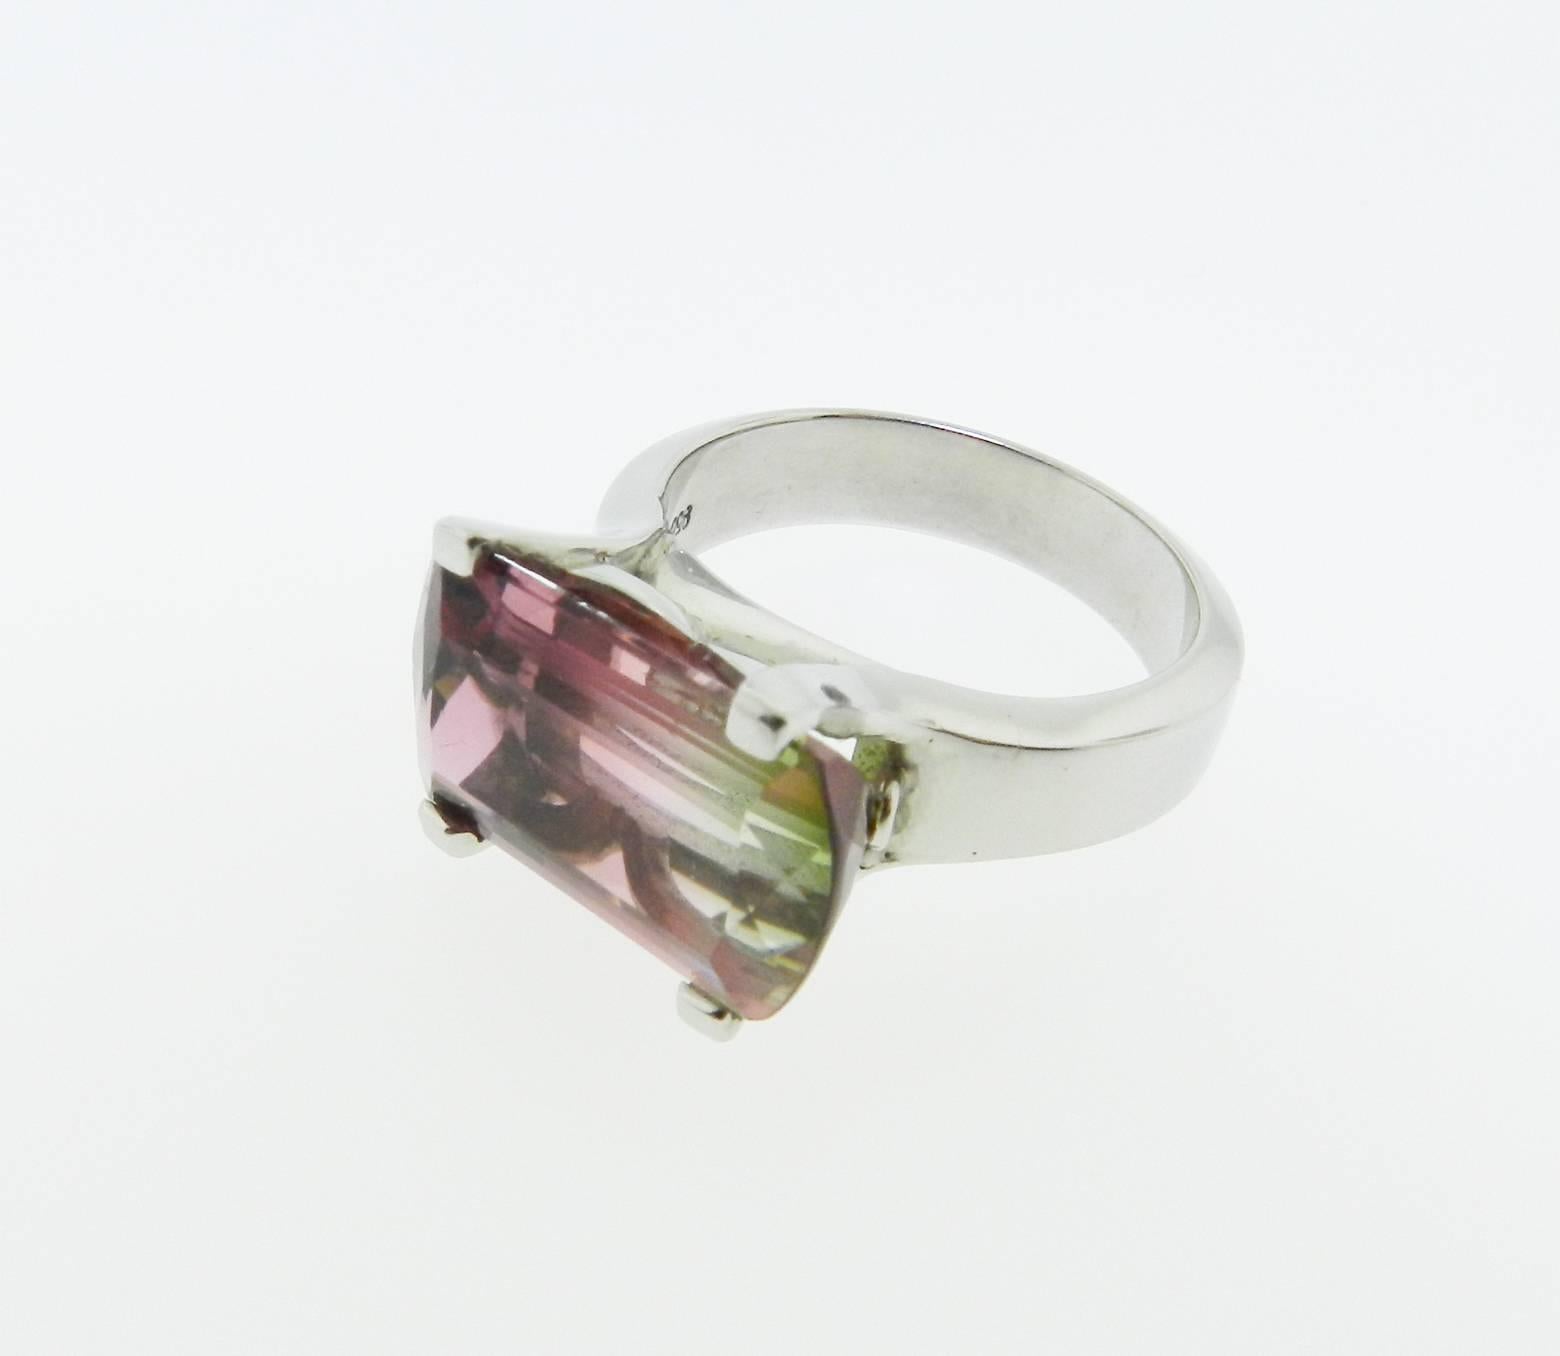 Stunning and unique elongated-shaped, faceted bi-color tourmaline ring. Handcrafted in platinum. 
Size 6